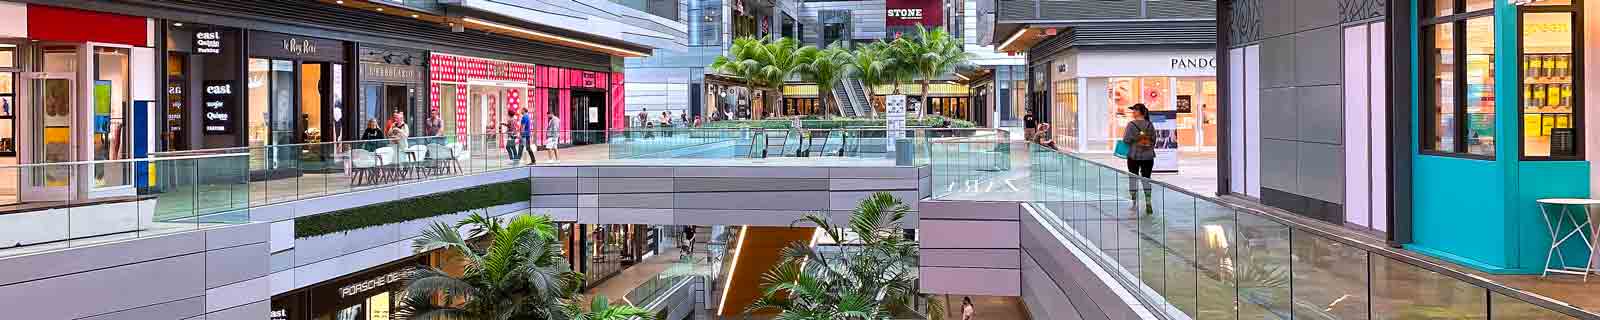 Photo by IQCruising of the Brickel City Center shopping mall close to the Port of Miami